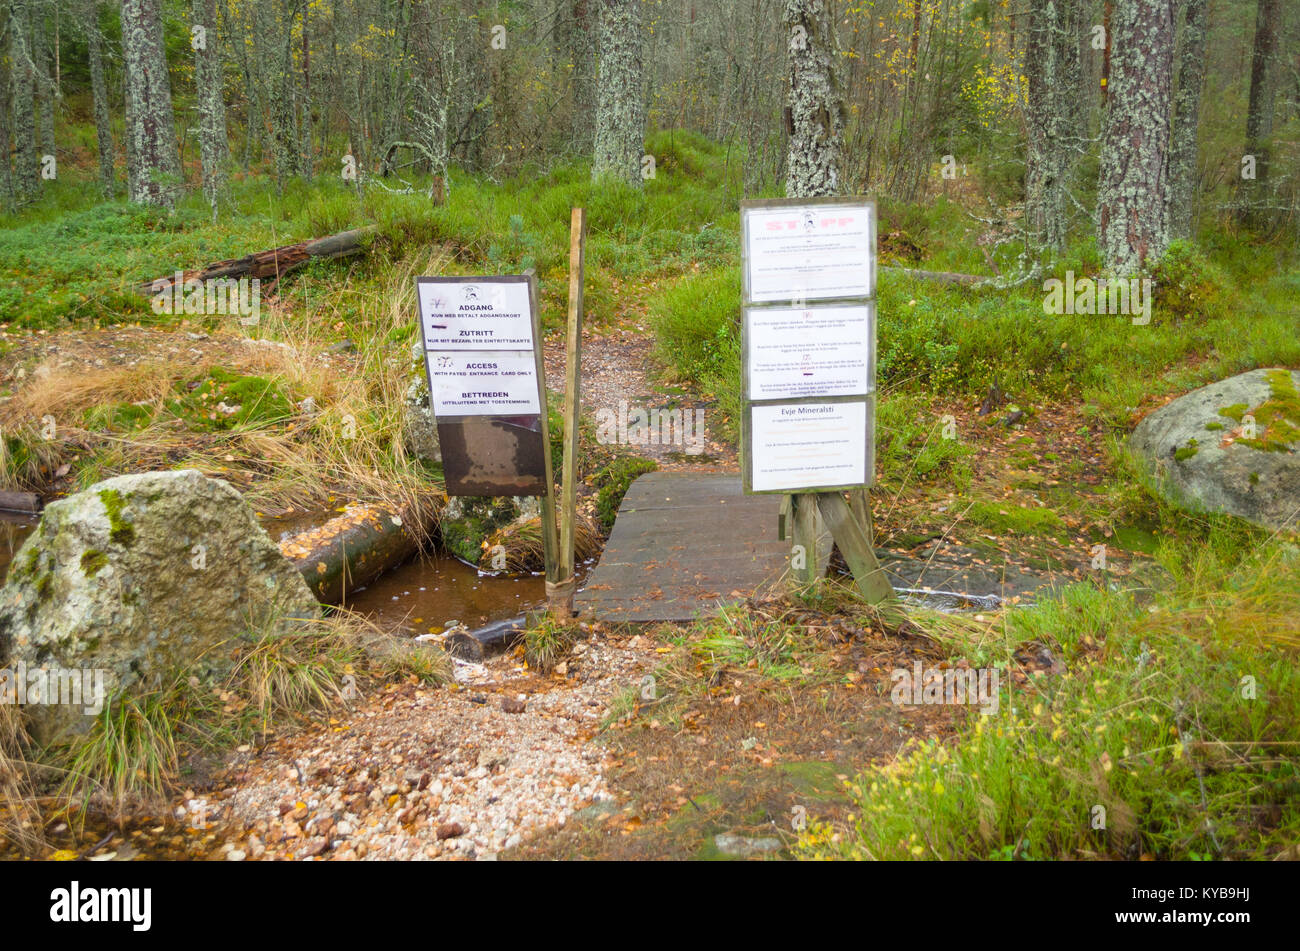 Entrance to educational footpath around Landsverk 1 in Evje Mineralsti- retired gemstone mine and local tourist attraction. Stock Photo